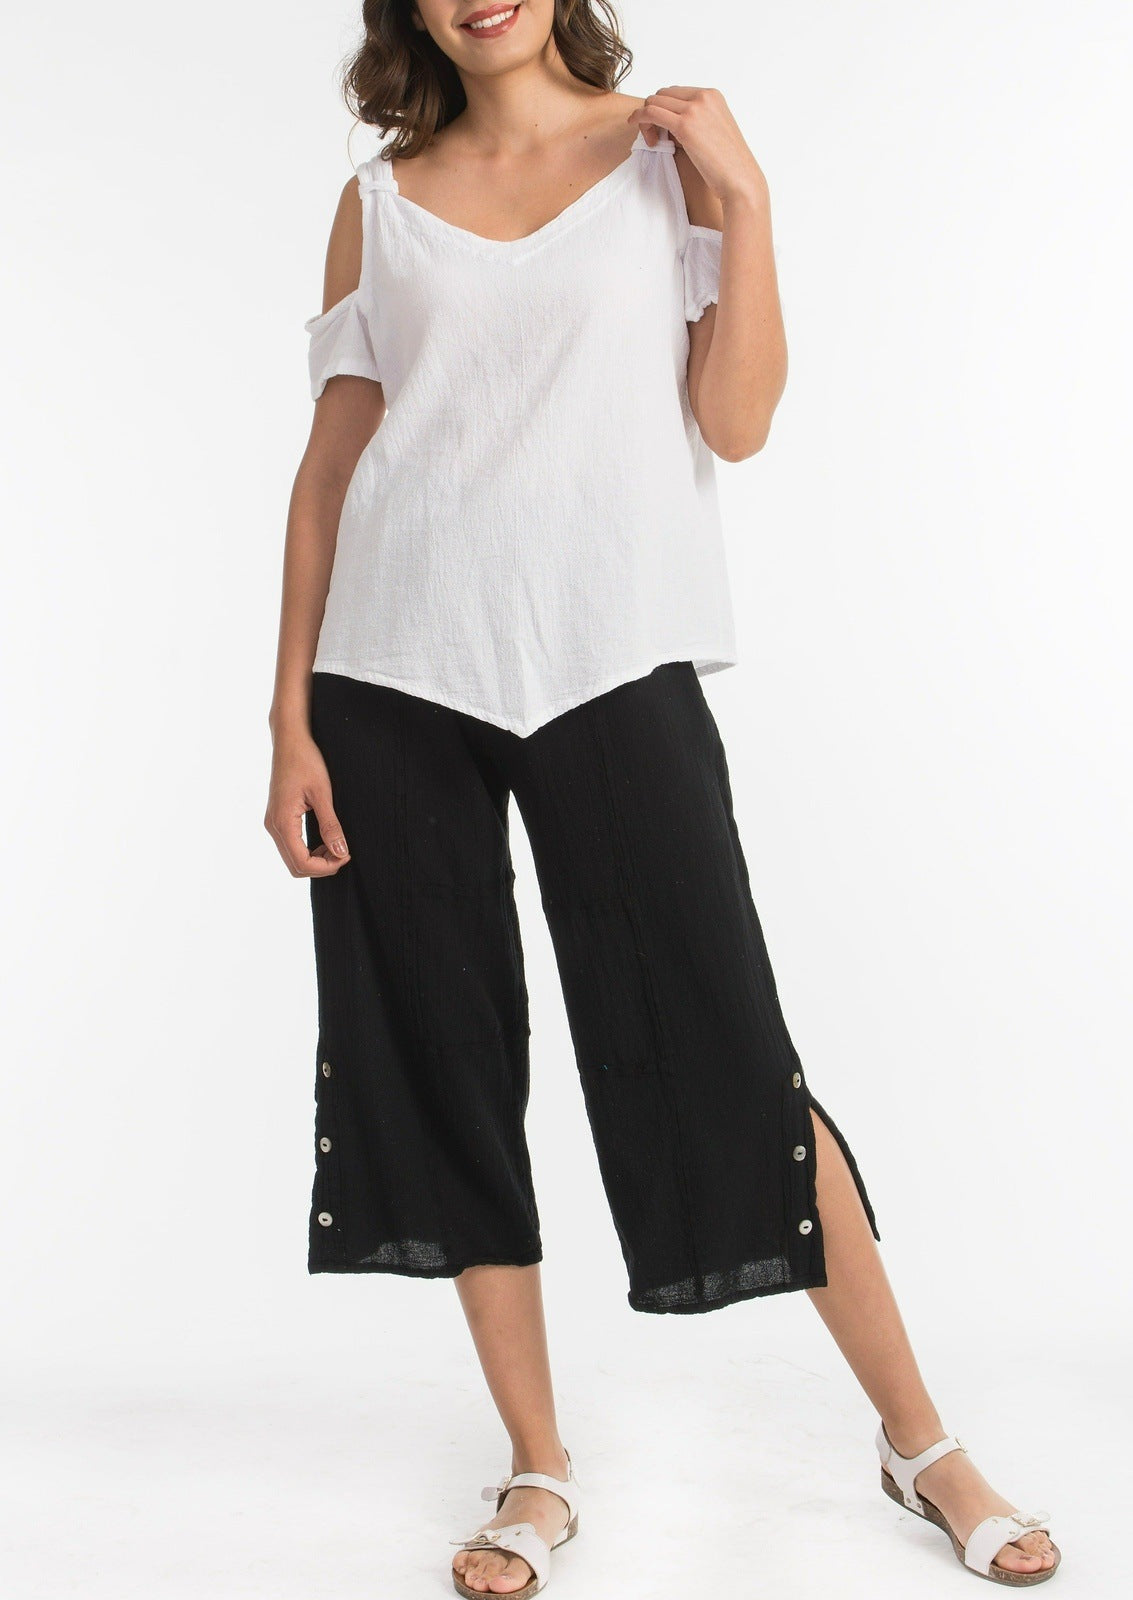 Frankie Pant -Perfect Fit Guaranteed, Now In Sale Colors!